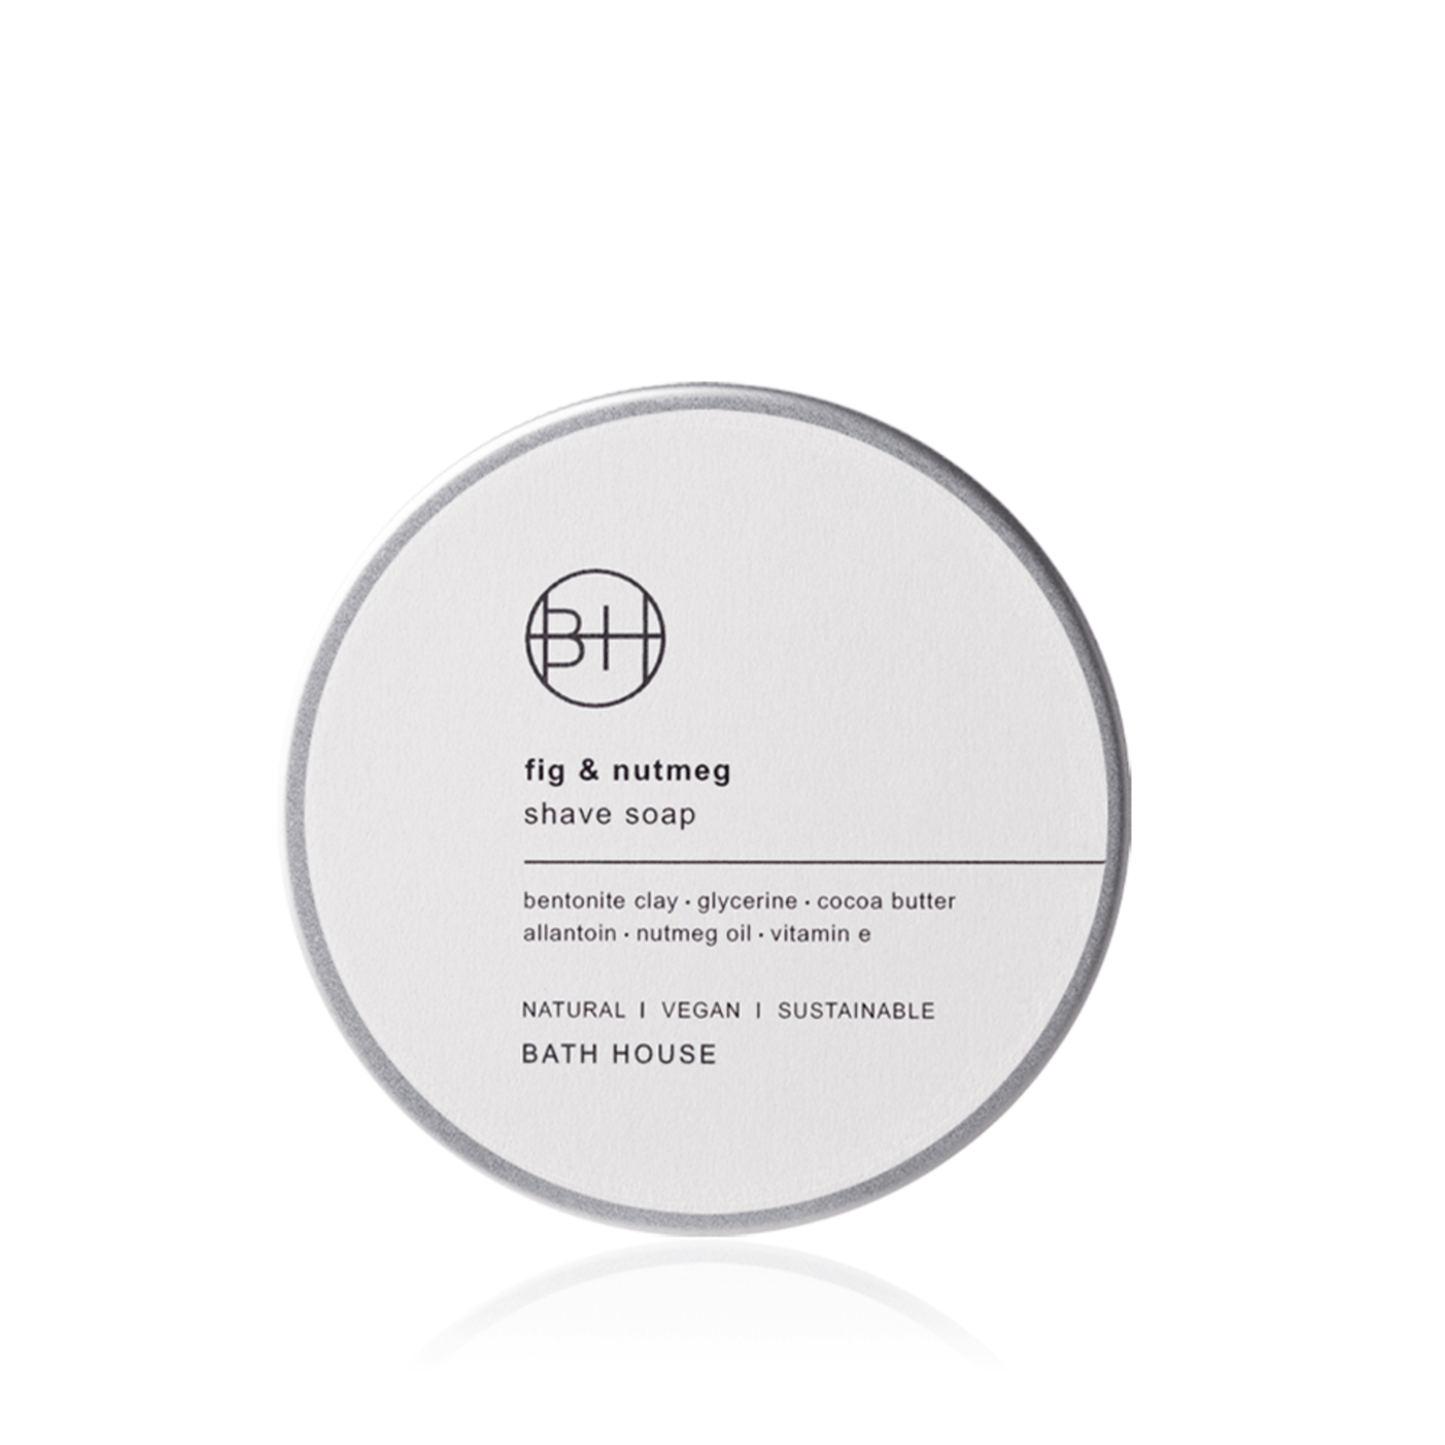 Primary Image of Fig & Nutmeg - Shave Soap in Tin